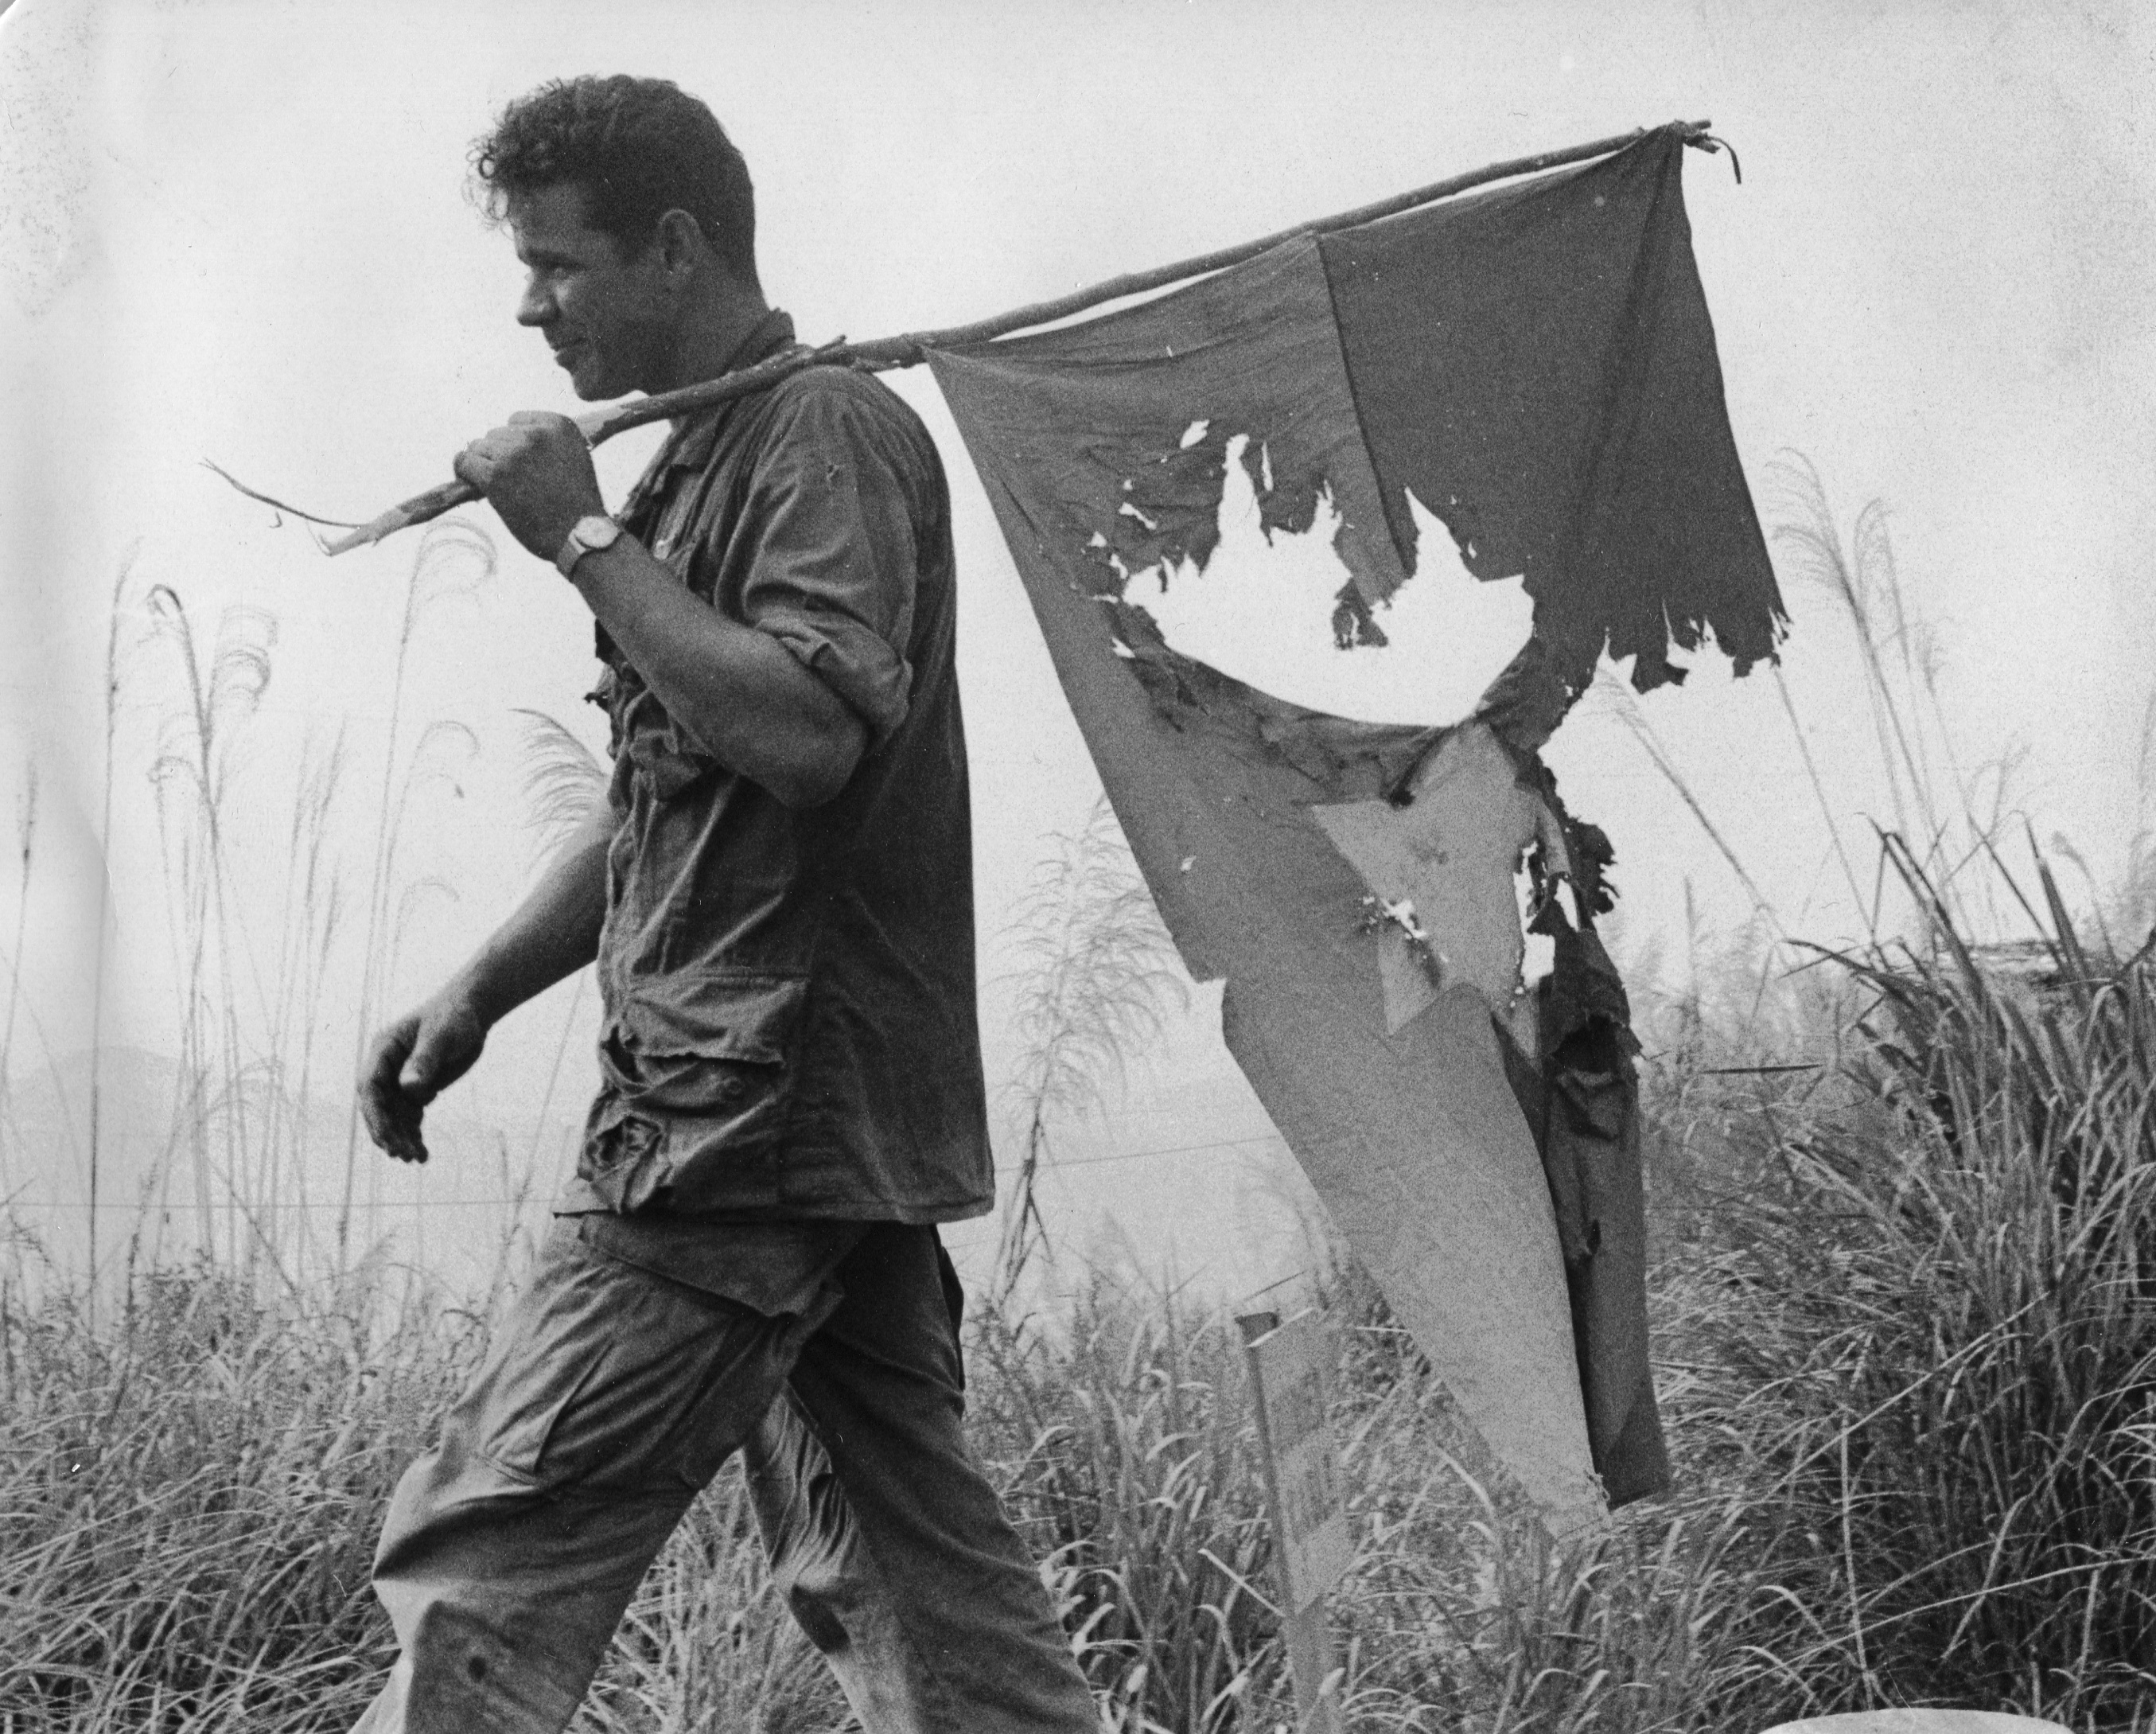 The Vietnam War: Facts & Info About the Most Controversial US Conflict